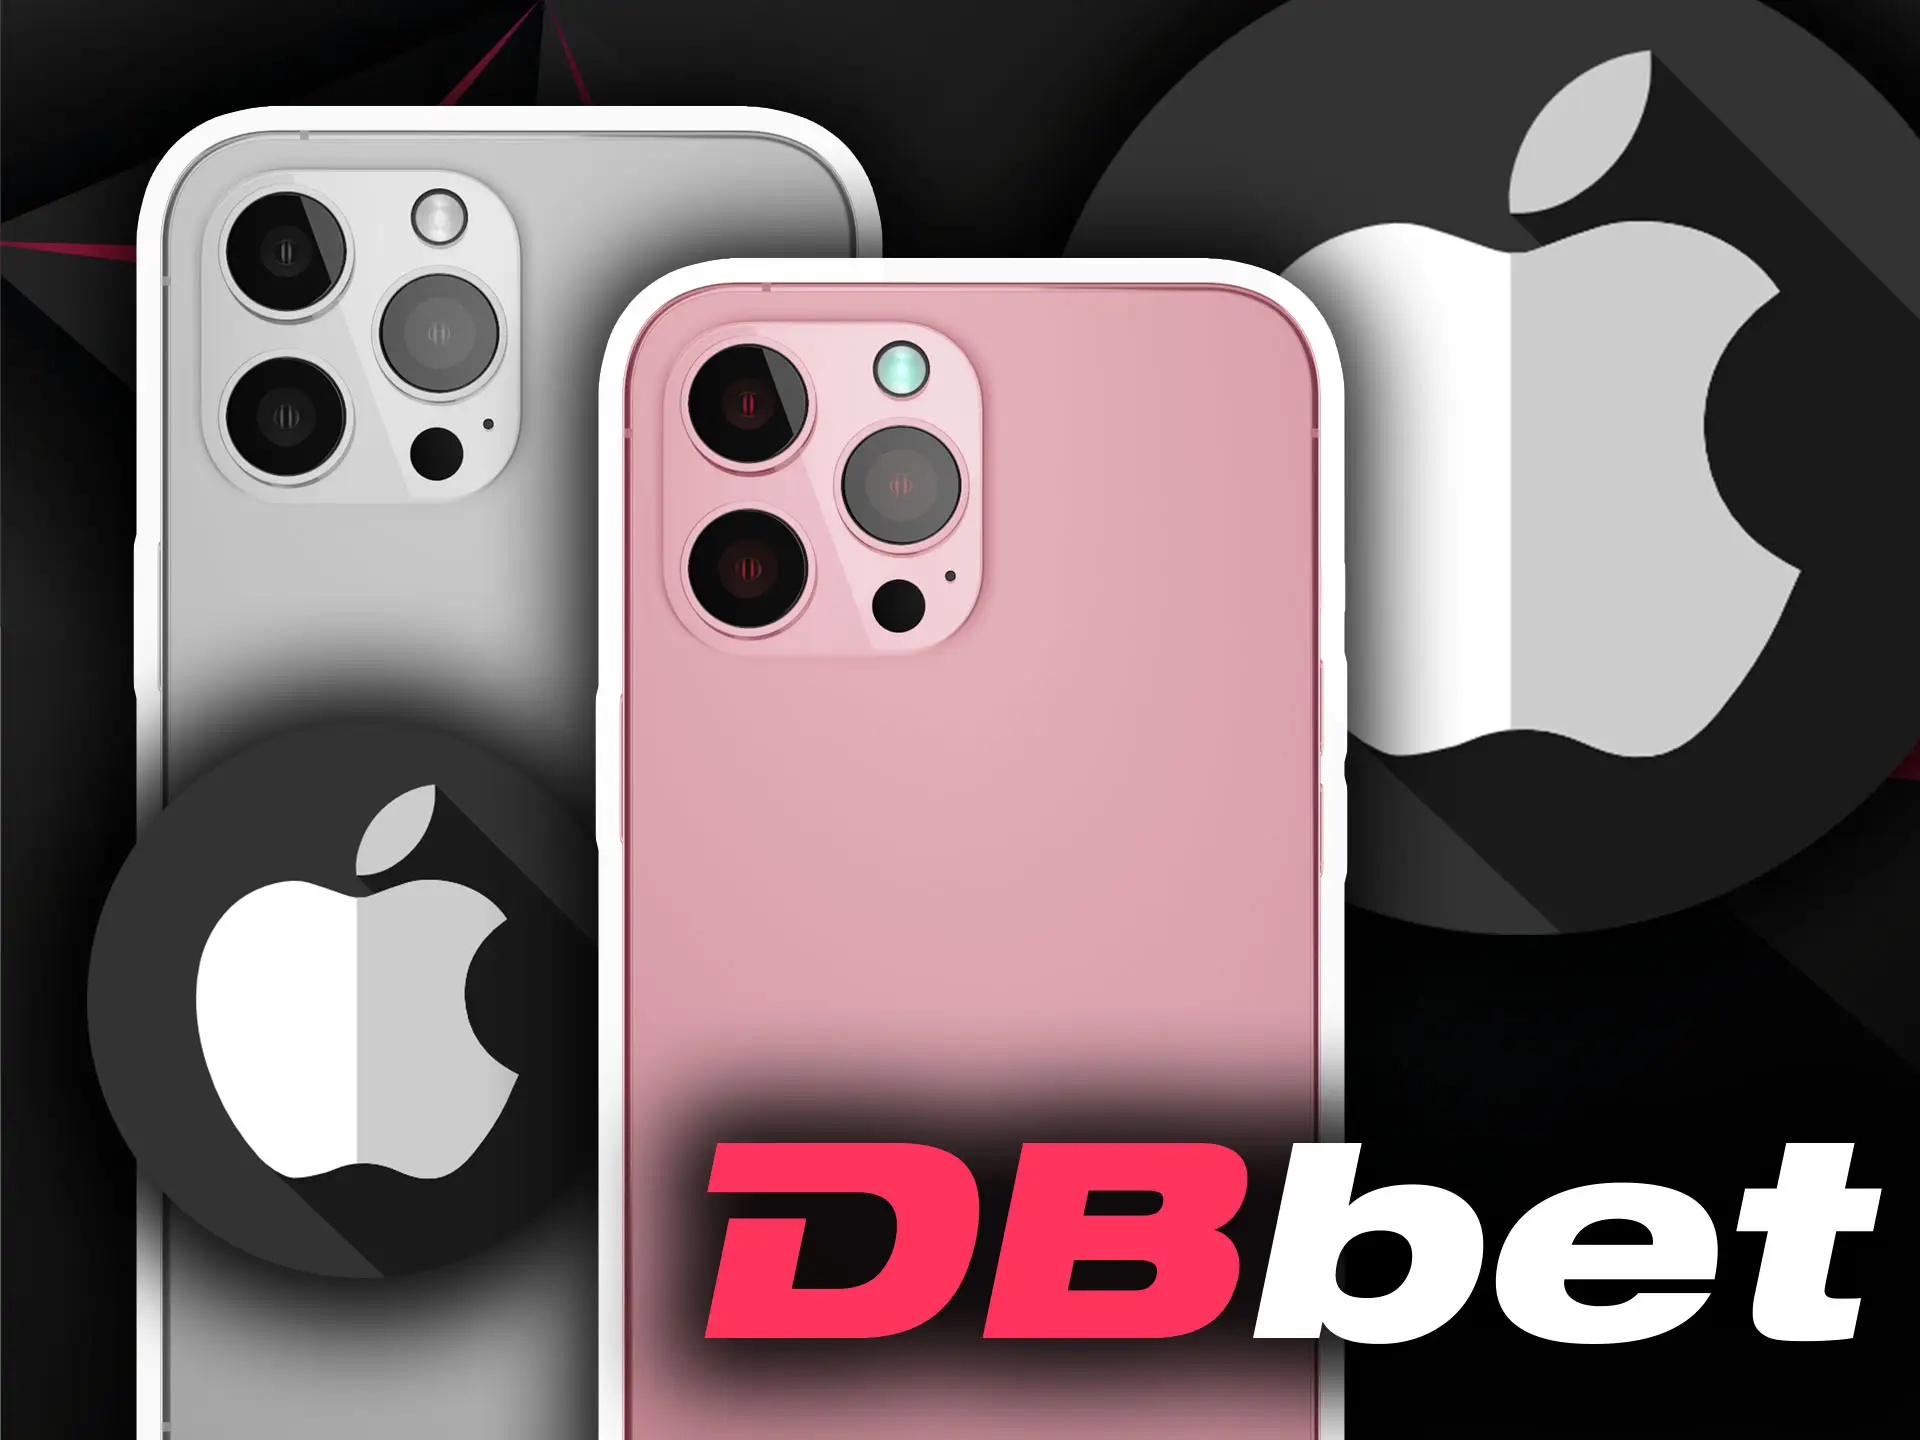 You can also install the DBbet app on your iPhone or iPad.